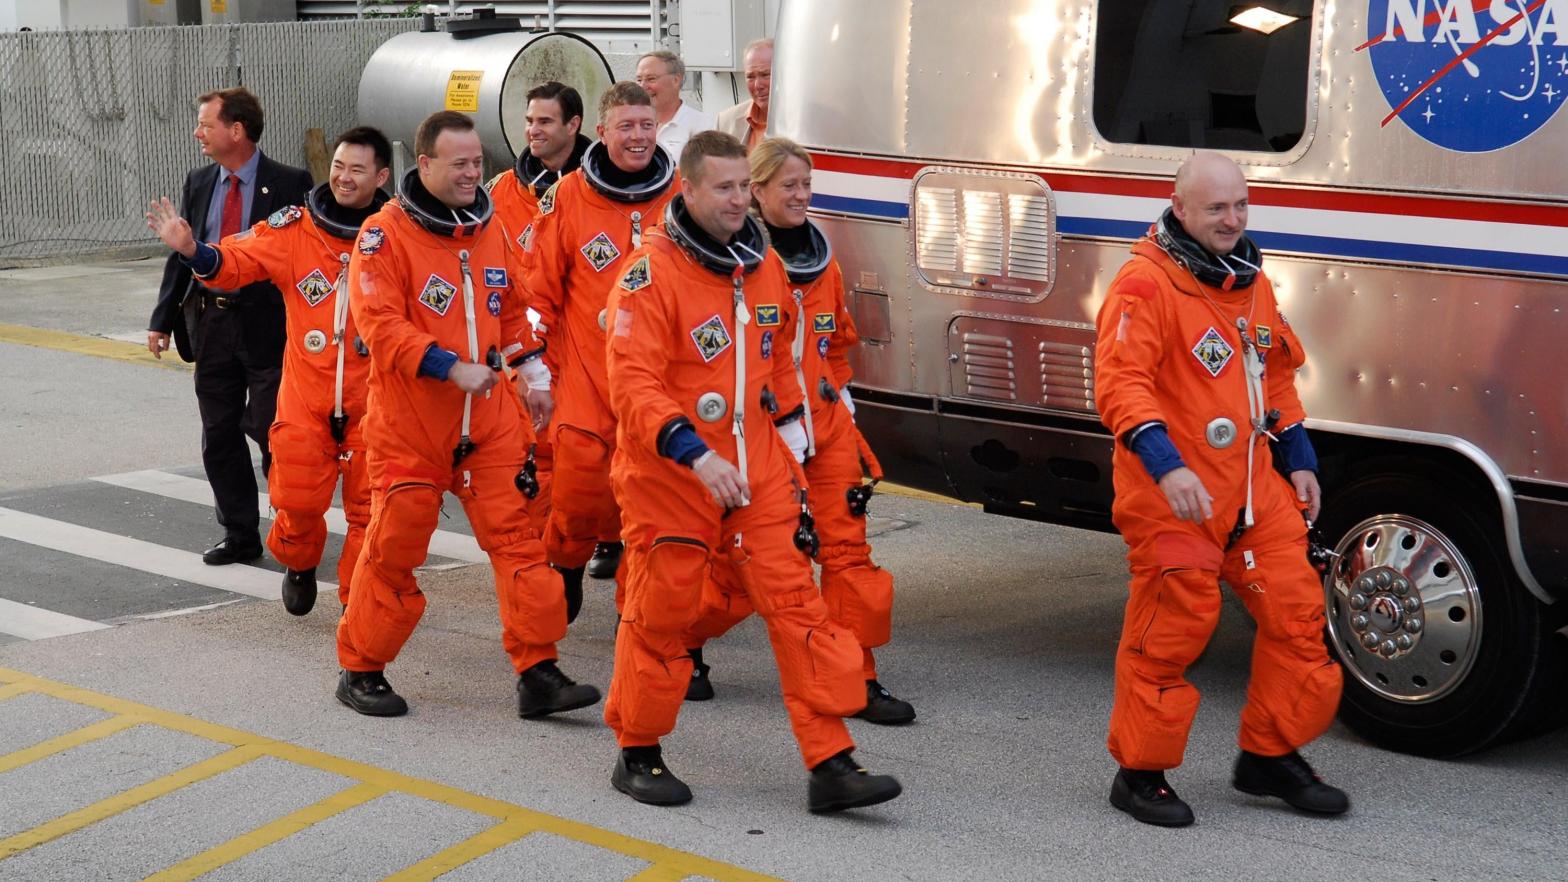 NASA Space Shuttle astronauts wearing their iconic orange suits while preparing for the STS-124 mission in 2008. (Photo: NASA)